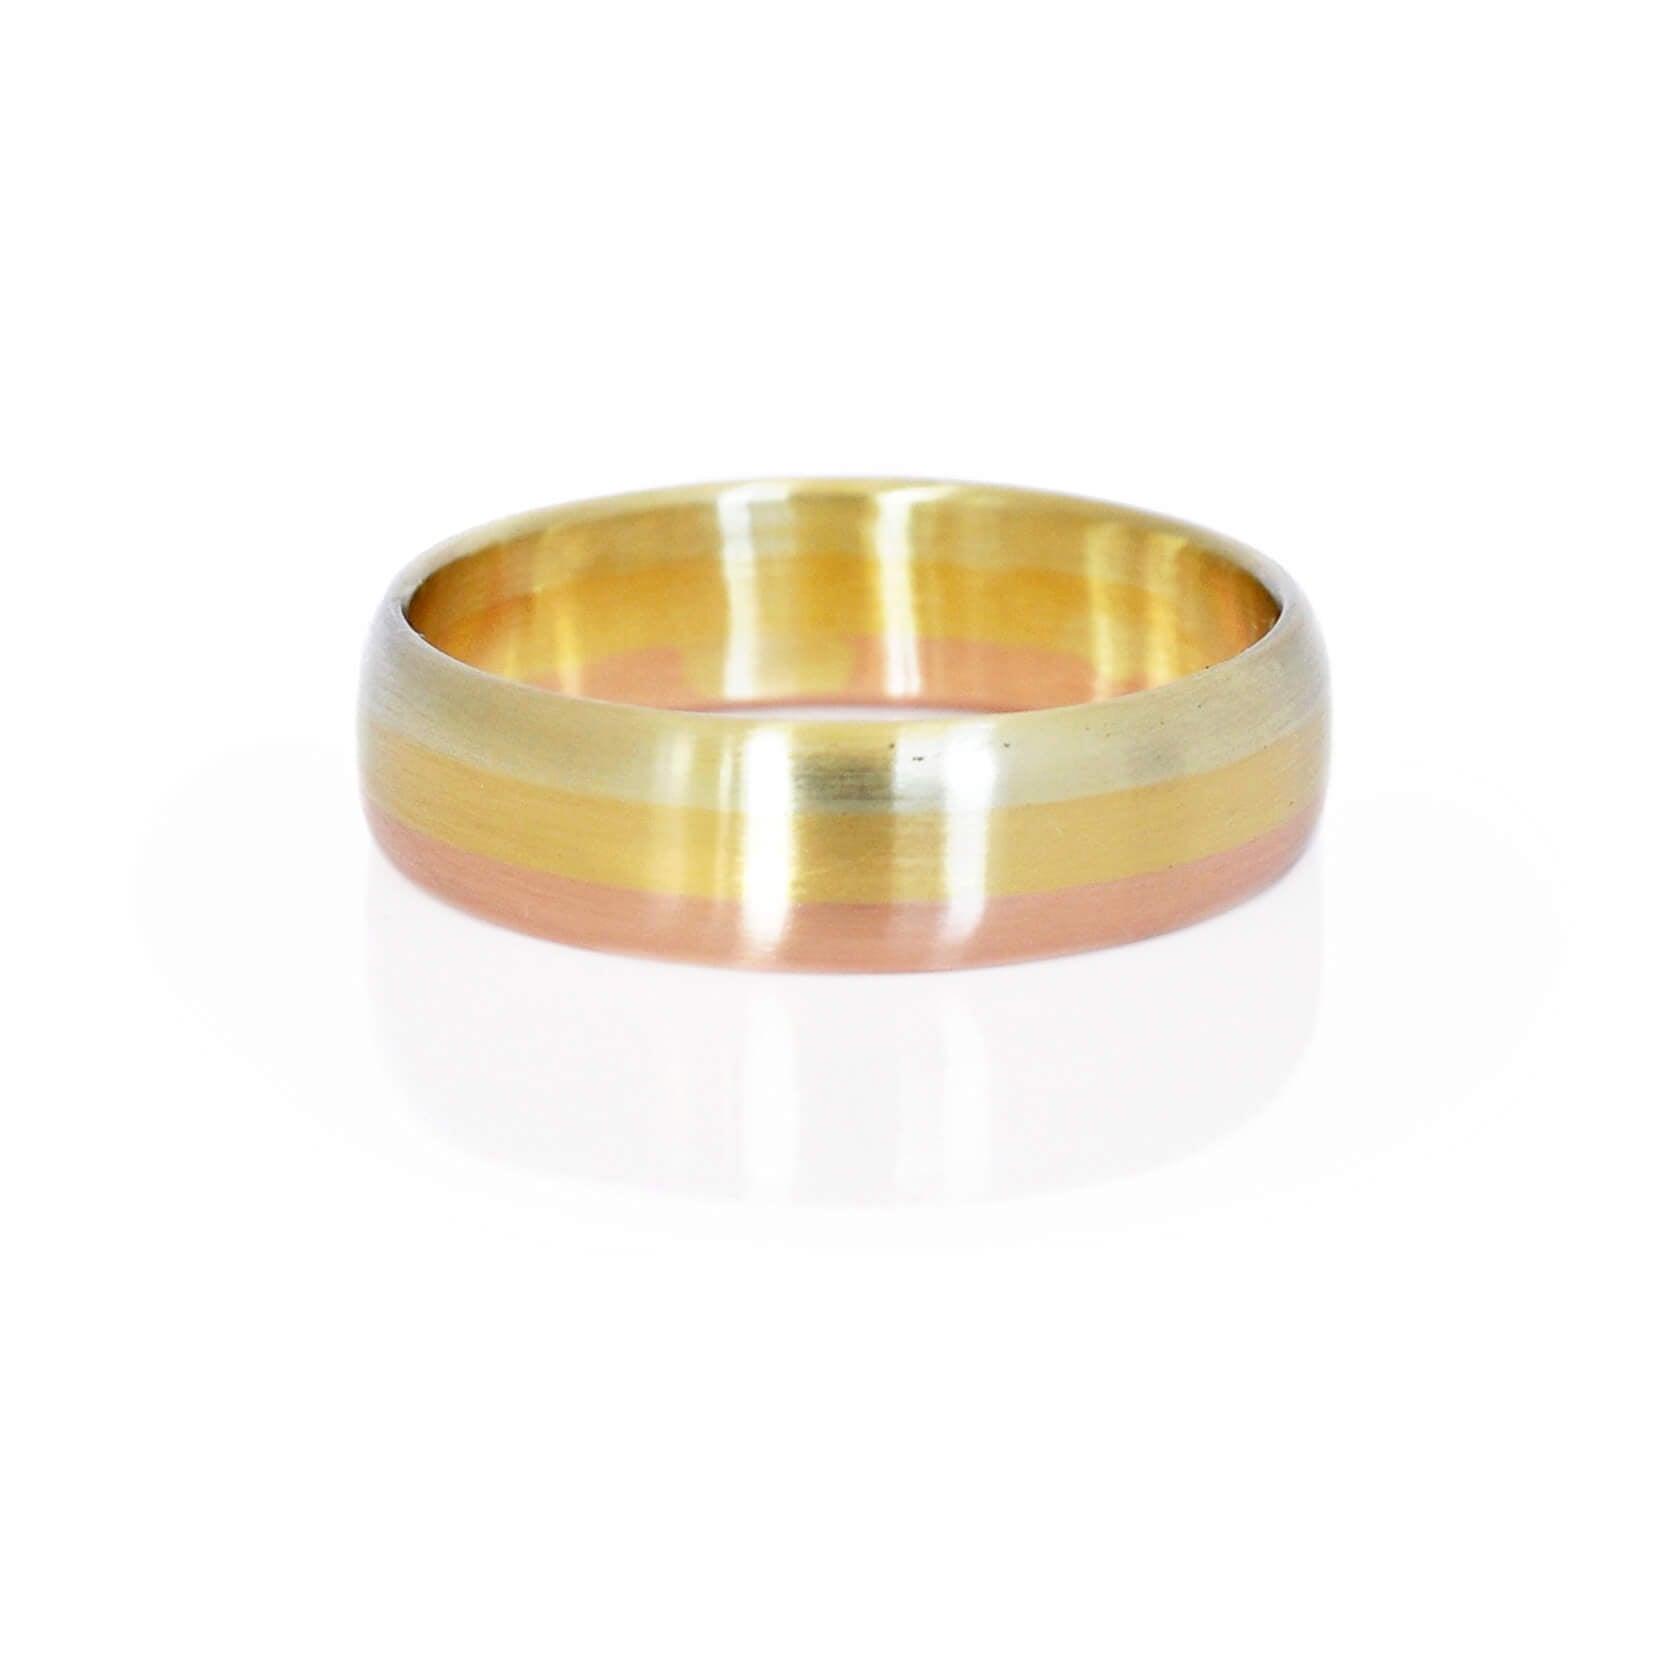 Satin finished low dome band in rainbow of green, yellow, and red gold. Handmade by EC Design Studio in Minneapolis, MN.